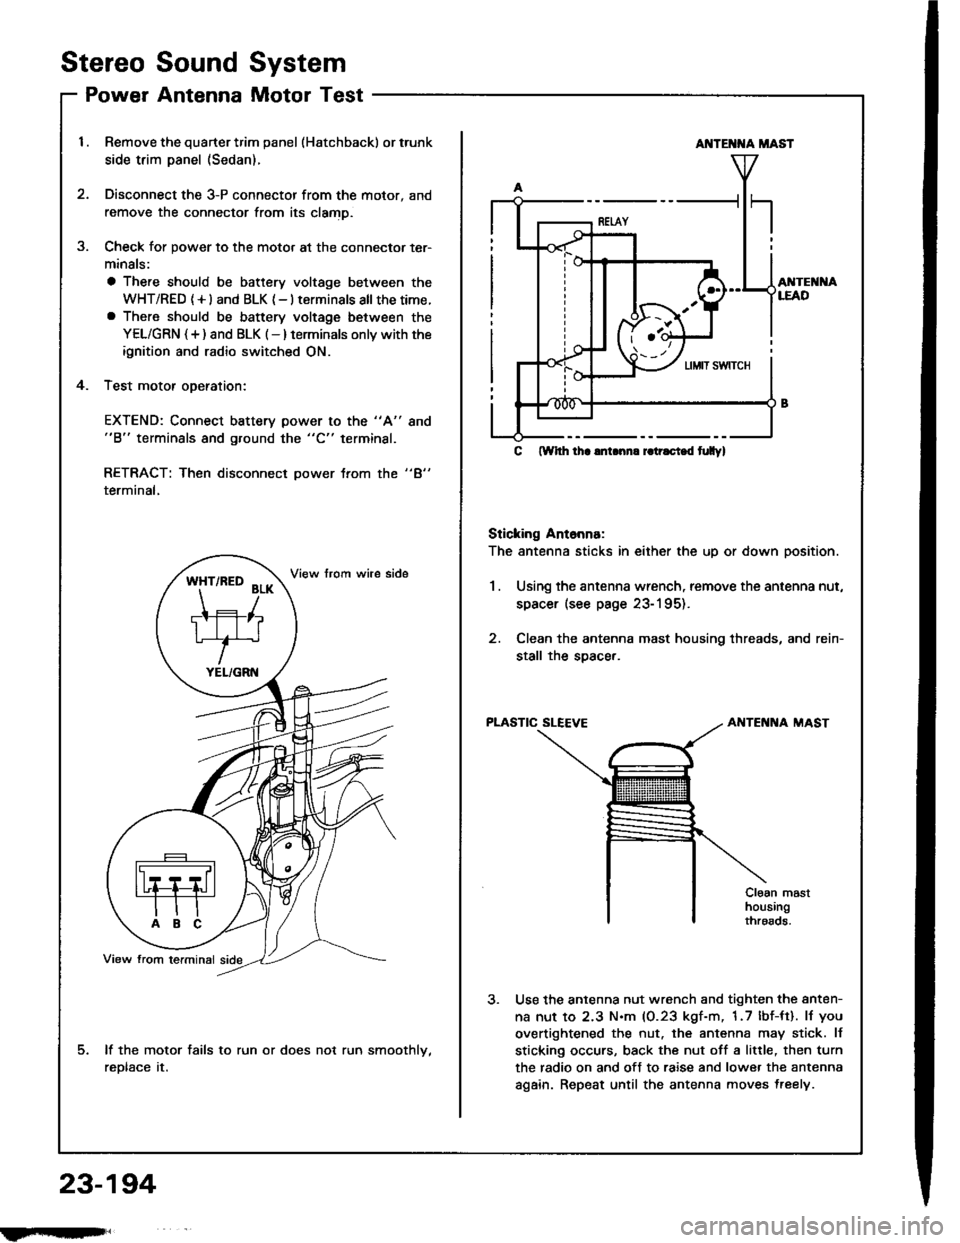 HONDA INTEGRA 1994 4.G Workshop Manual Stereo
Power
Sound
Antenna
System
Motor Test
Remove the quarter trim panel (Hatchback) or trunk
side trim panel (Sedan).
Disconnect the 3-P connector from the motor, and
remove the connector from its 